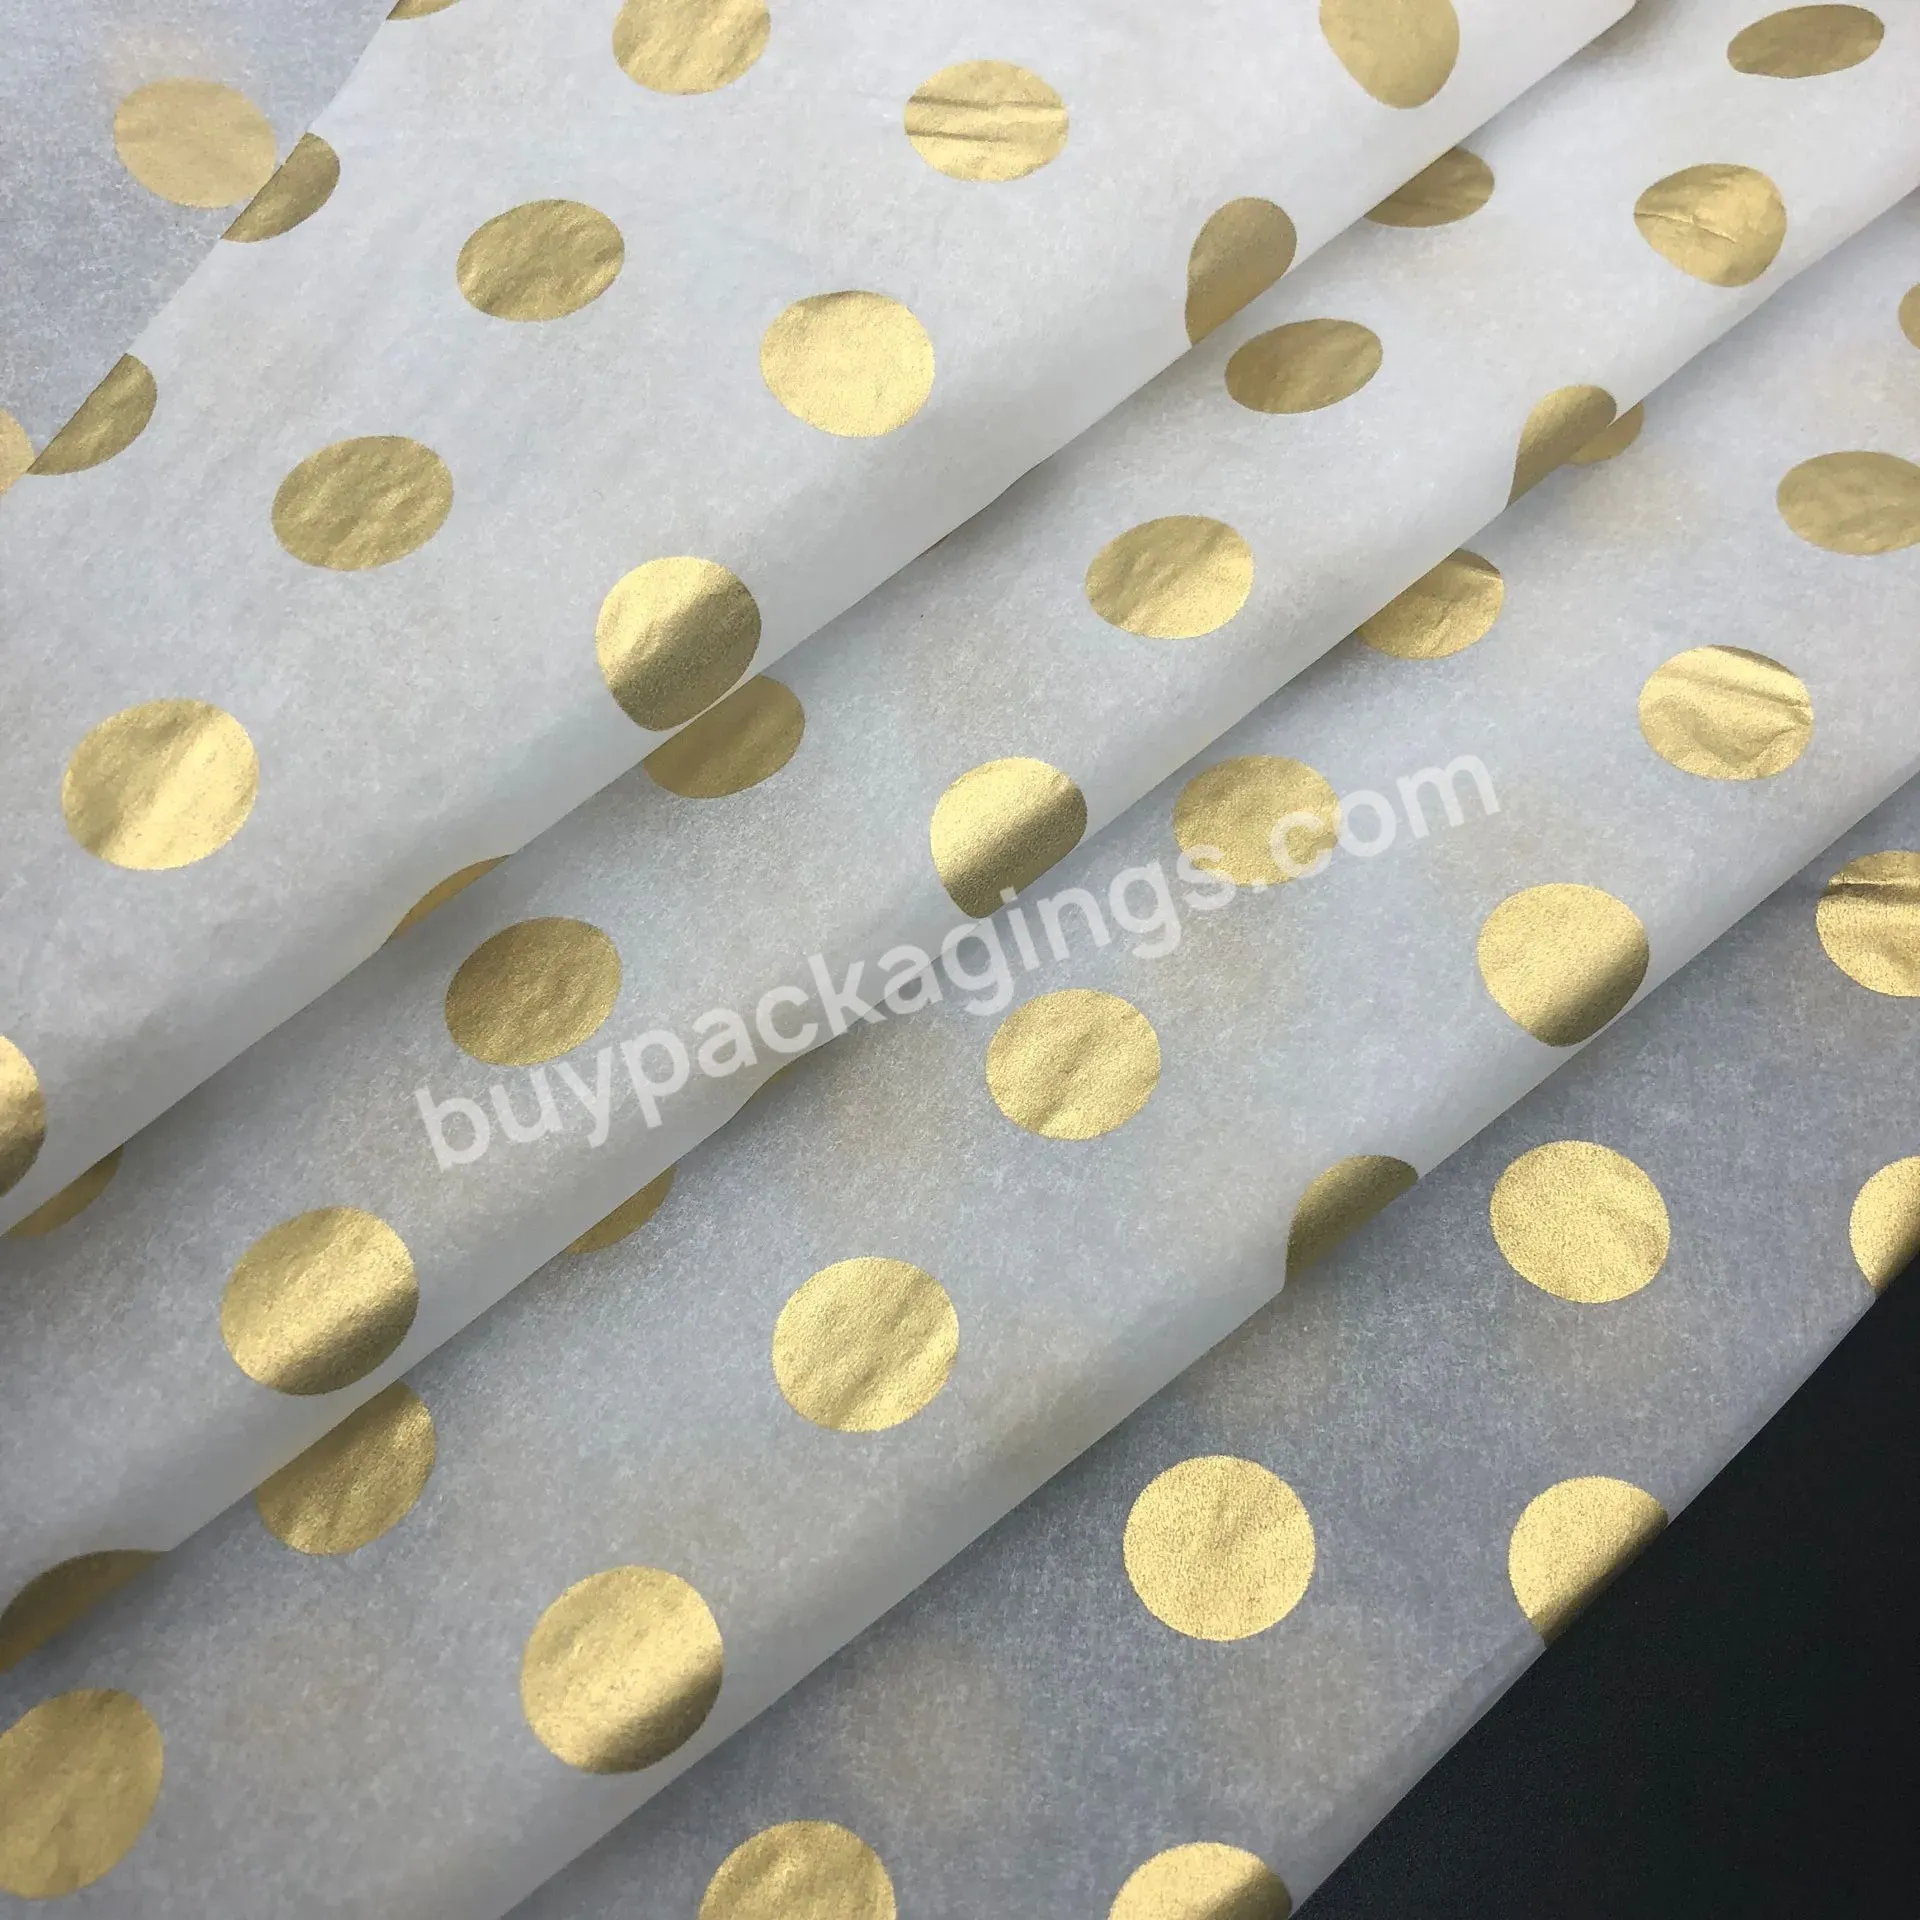 Ready To Ship 17g White Tissue Silk Paper With Gold Circle Printed Logo For Clothing Wrapping - Buy White Tissue Silk Paper,Tissue Paper,Silk Paper.